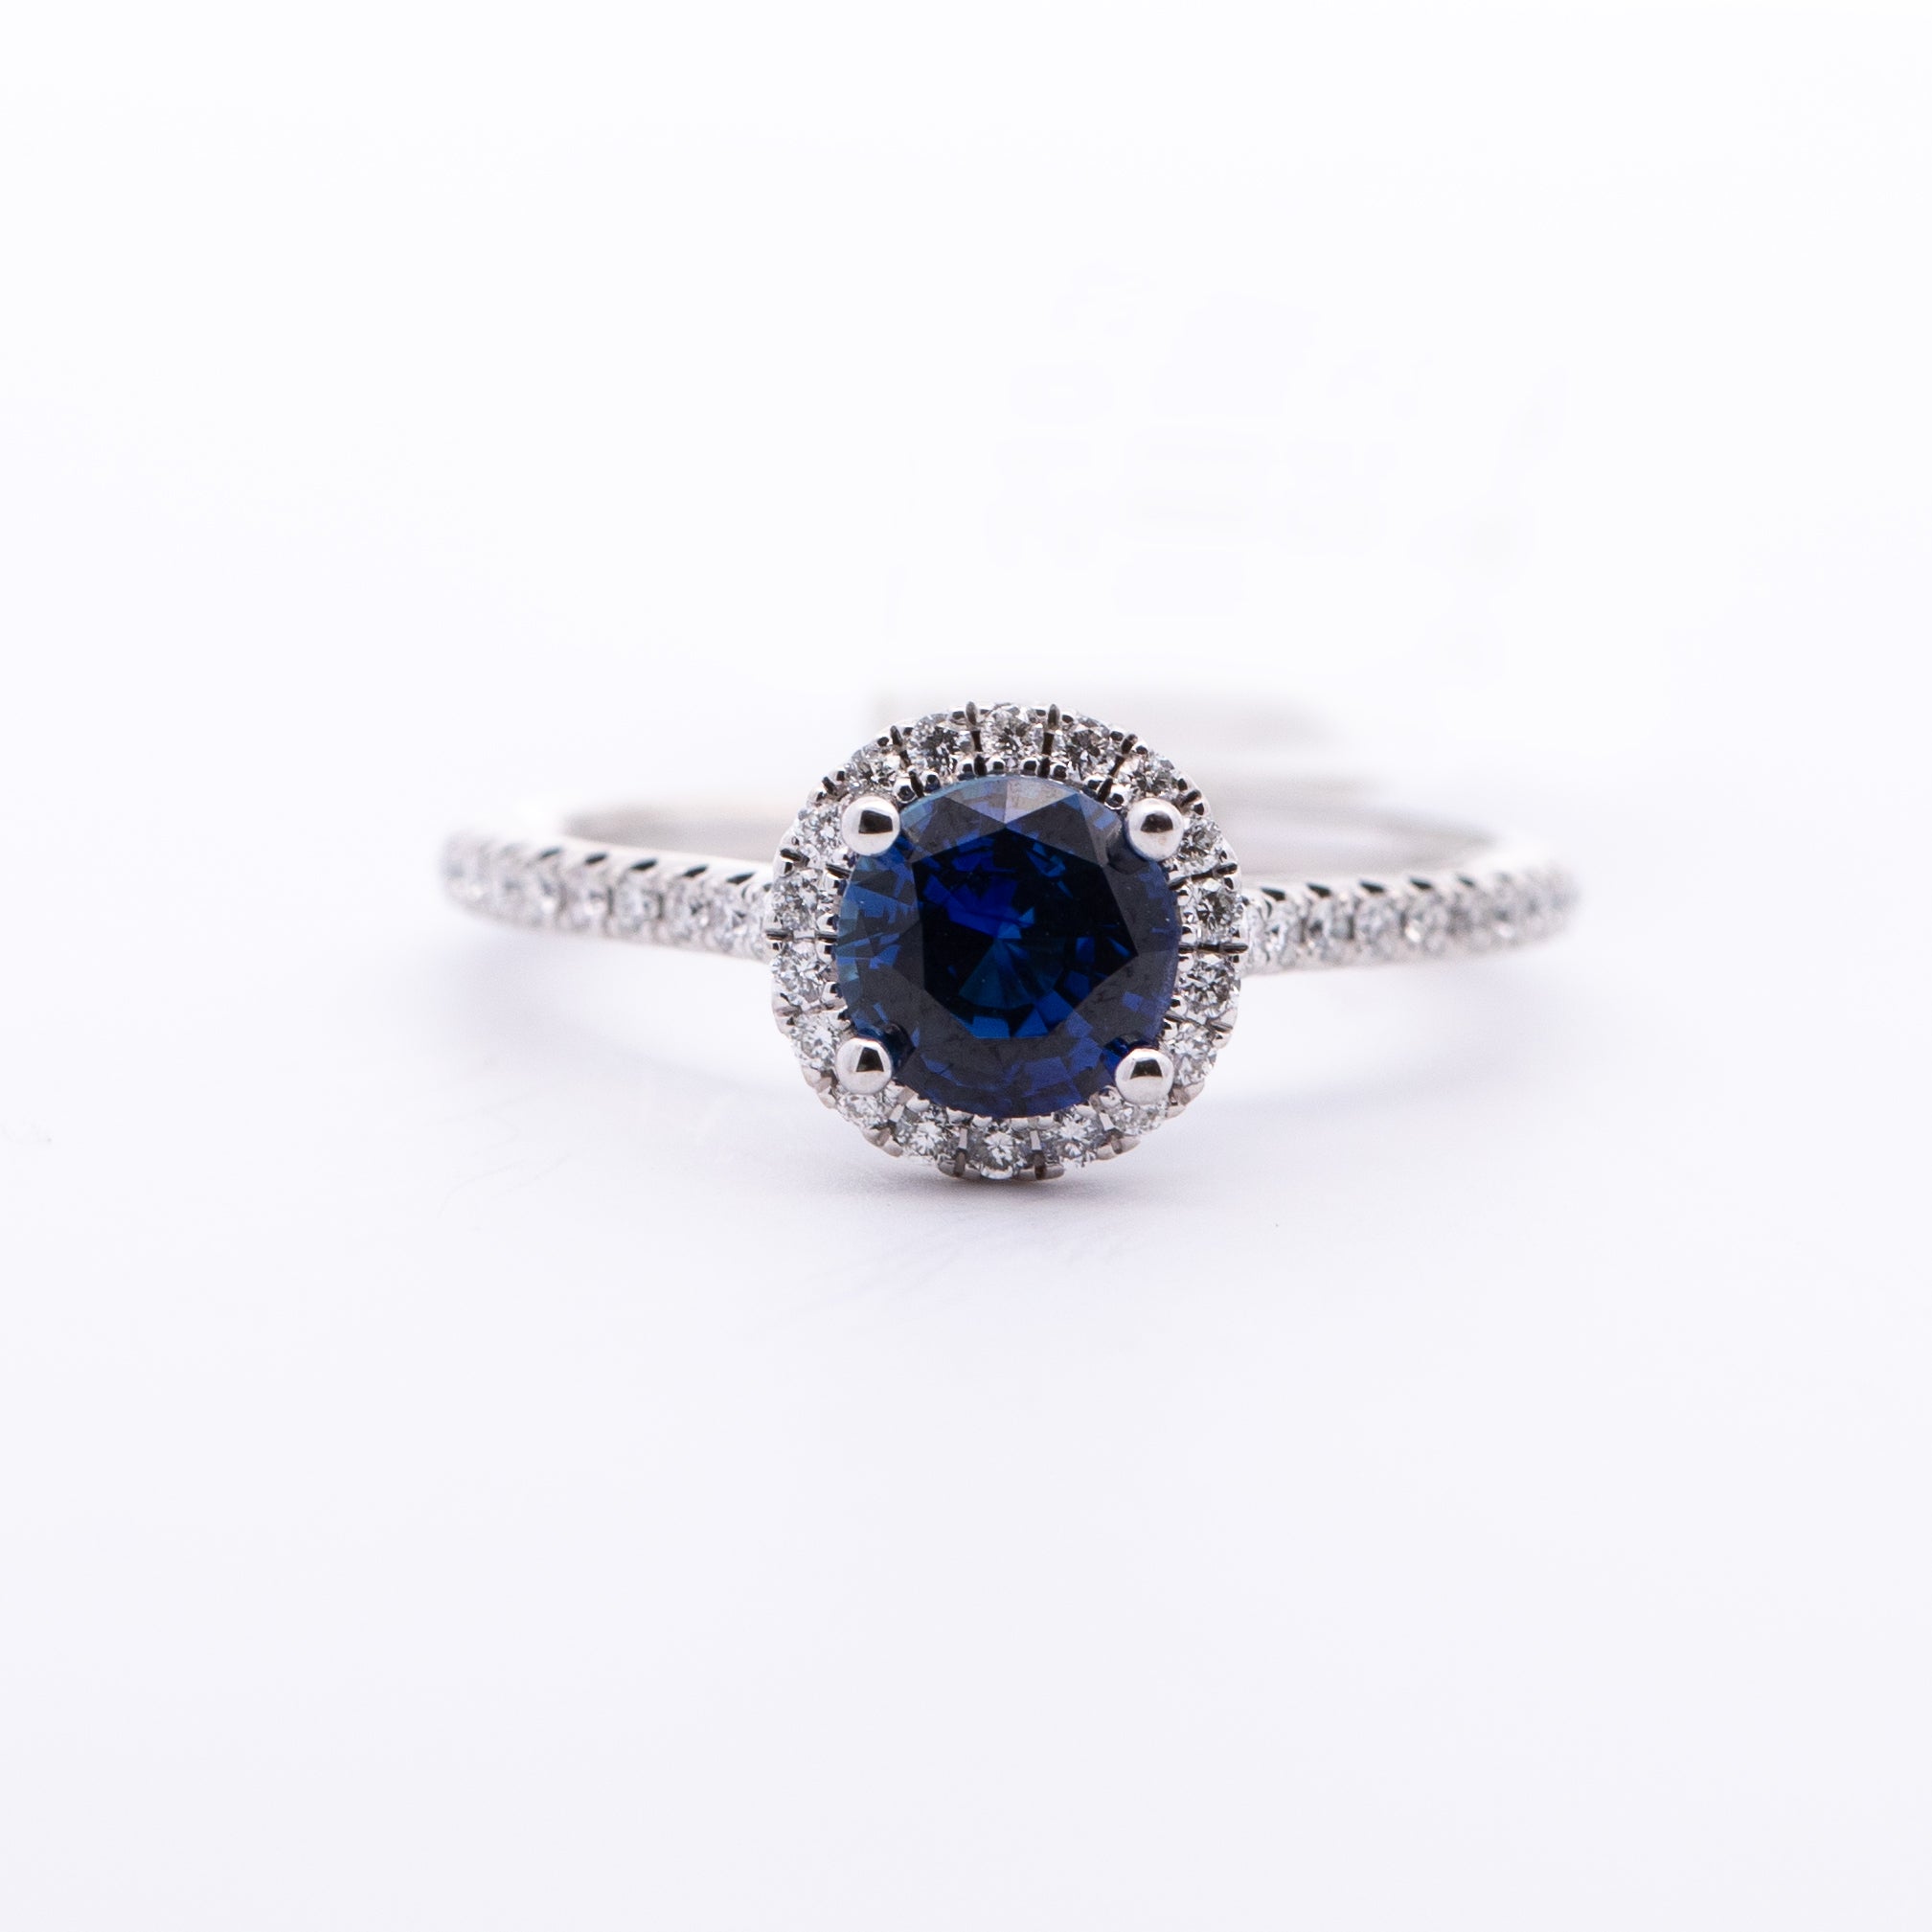 Style: Classic Description: Fashion Ring - Colored Stone Rings - Womens